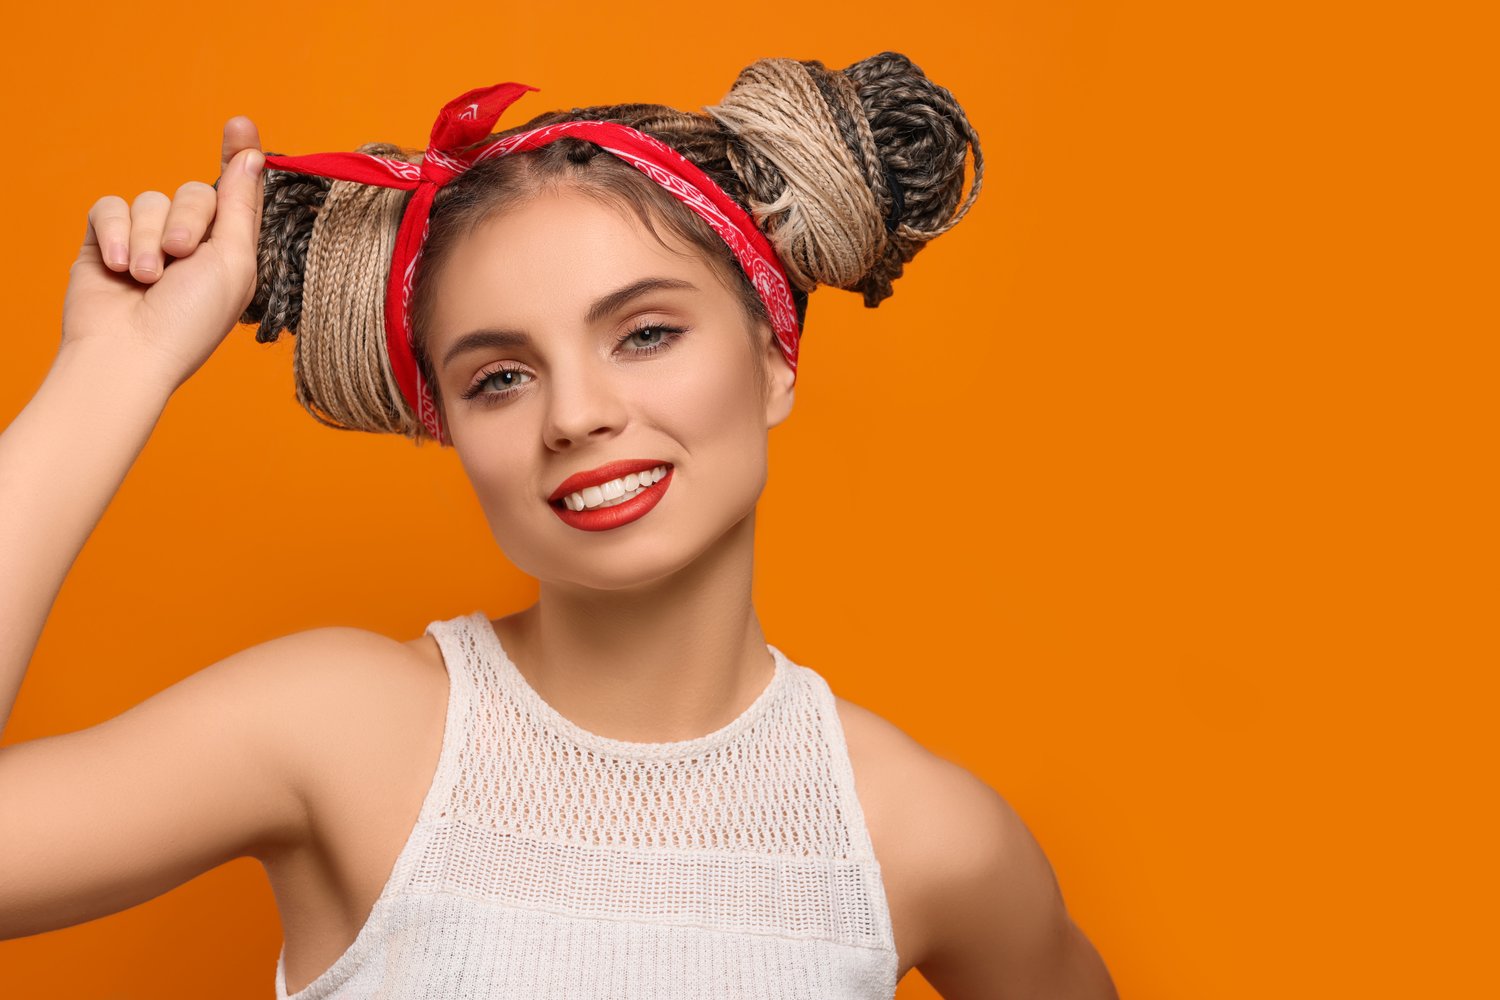 Free photo of beautiful woman with braided double buns on orange background, space for text